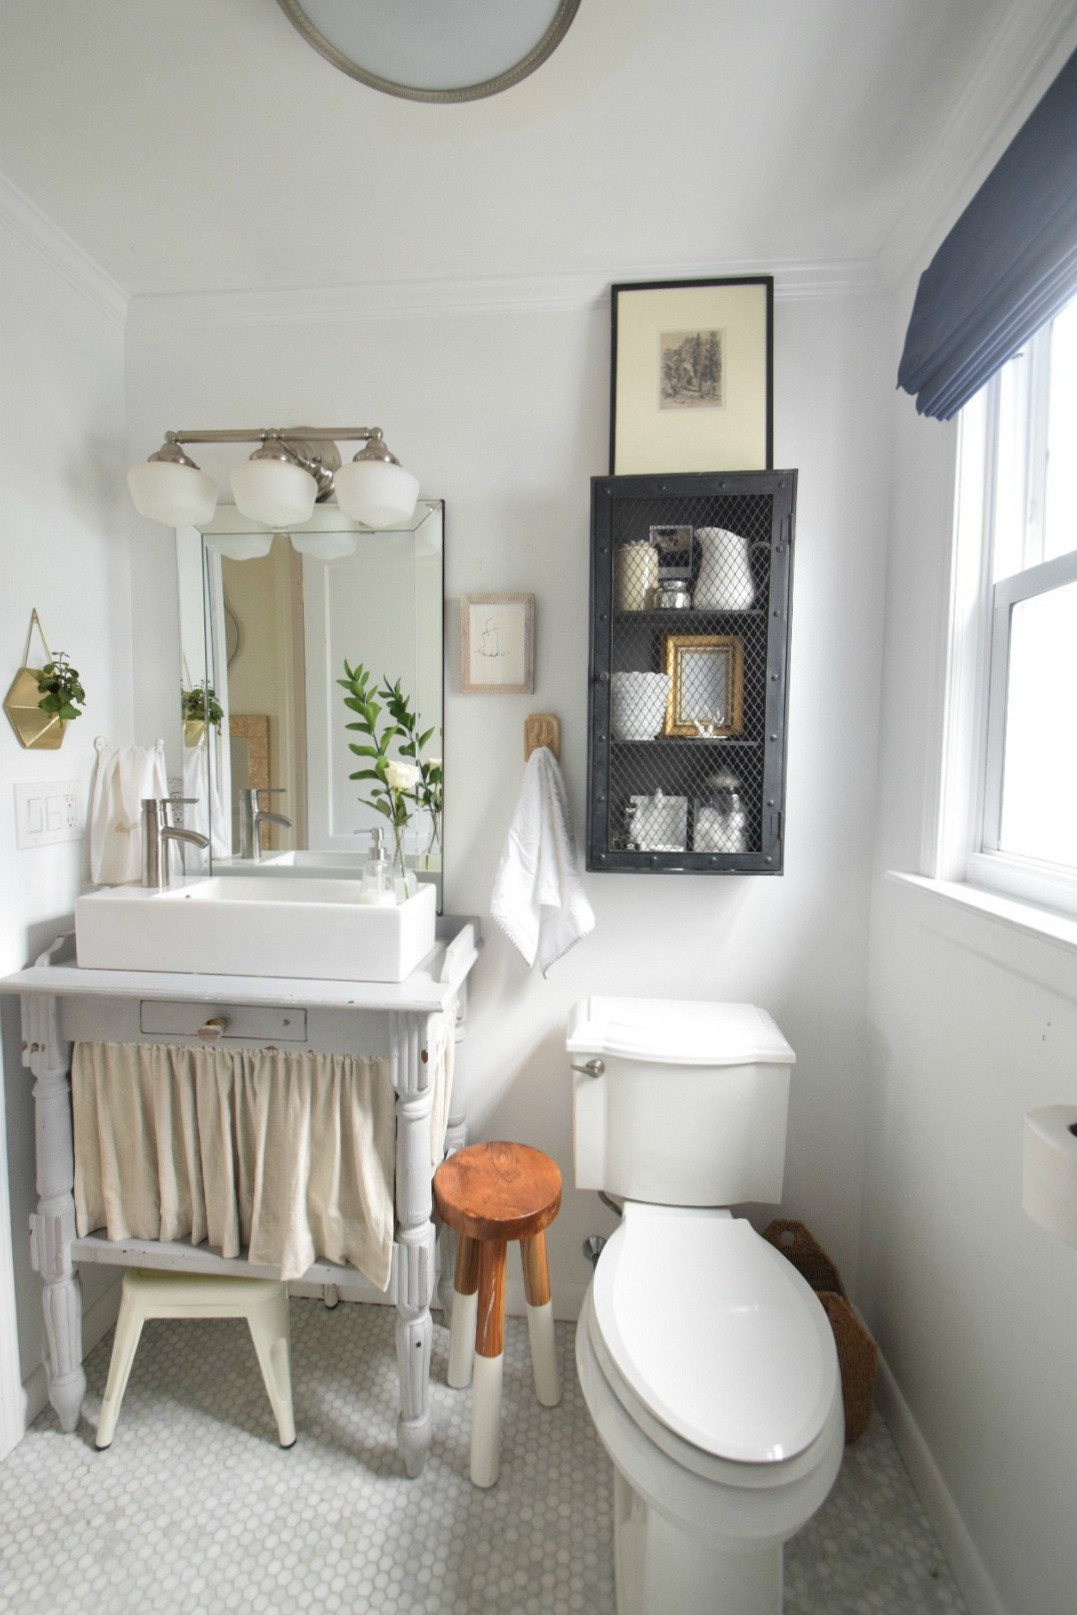 Bathroom Decorating Ideas Pinterest
 Small Bathroom Ideas and Solutions in our Tiny Cape